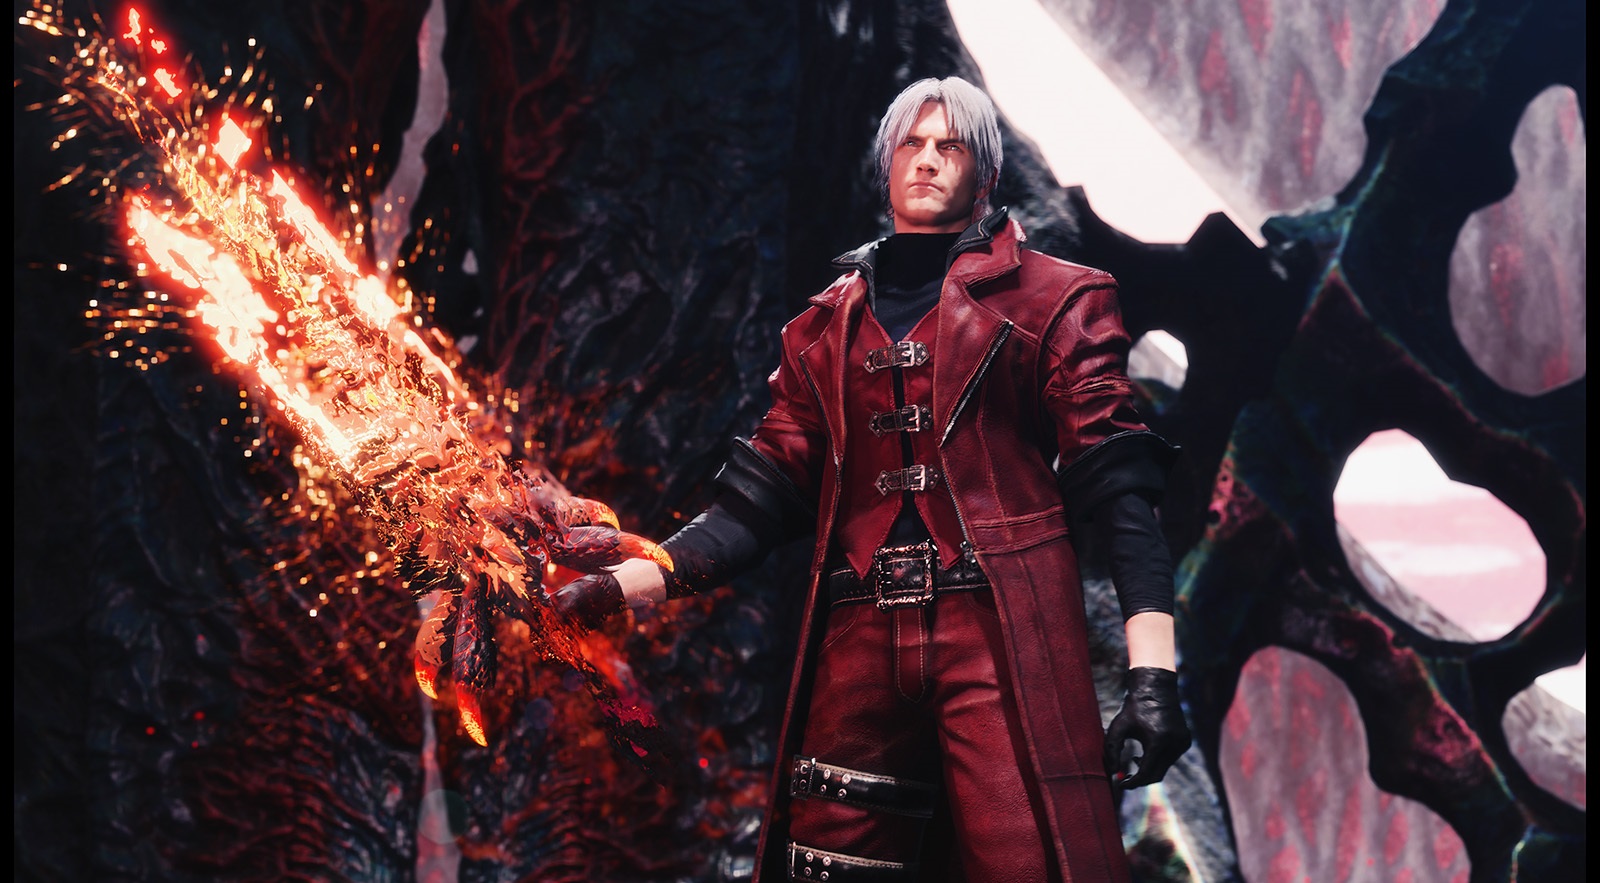 Devil May Cry Pack 1 – Xenoverse Mods